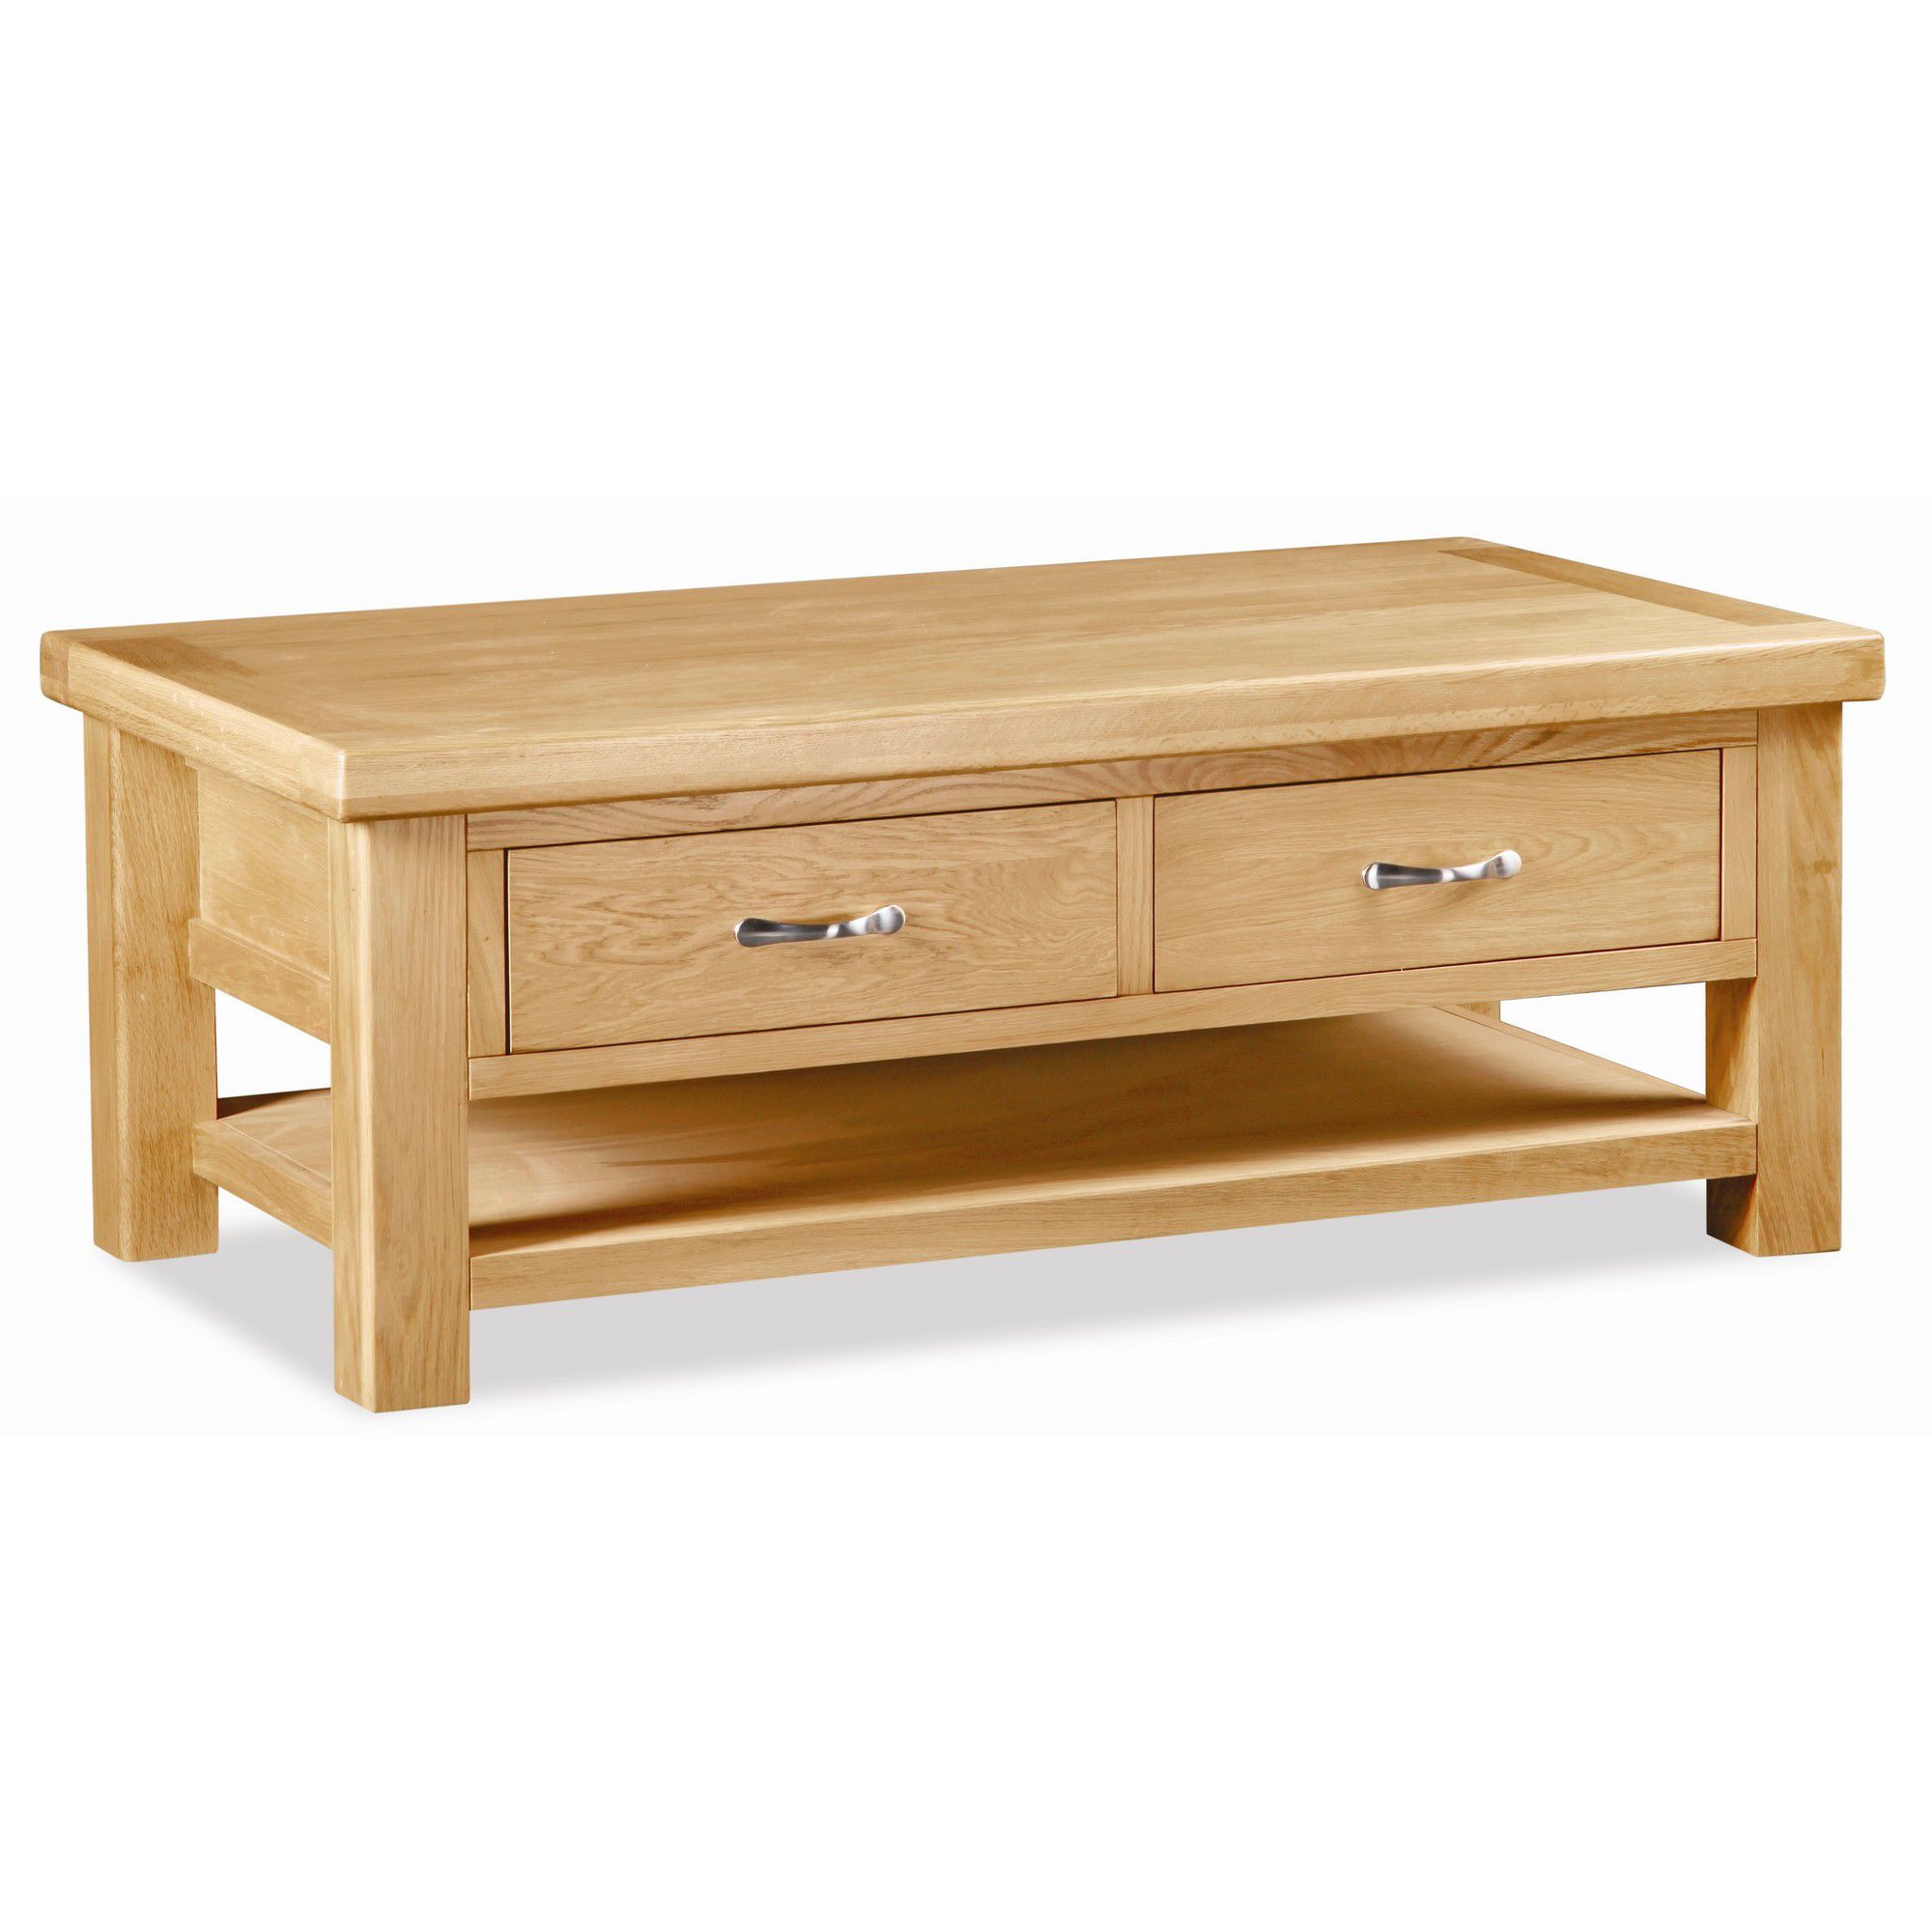 Alterton Furniture Highgate Coffee Table - Small at Tesco Direct